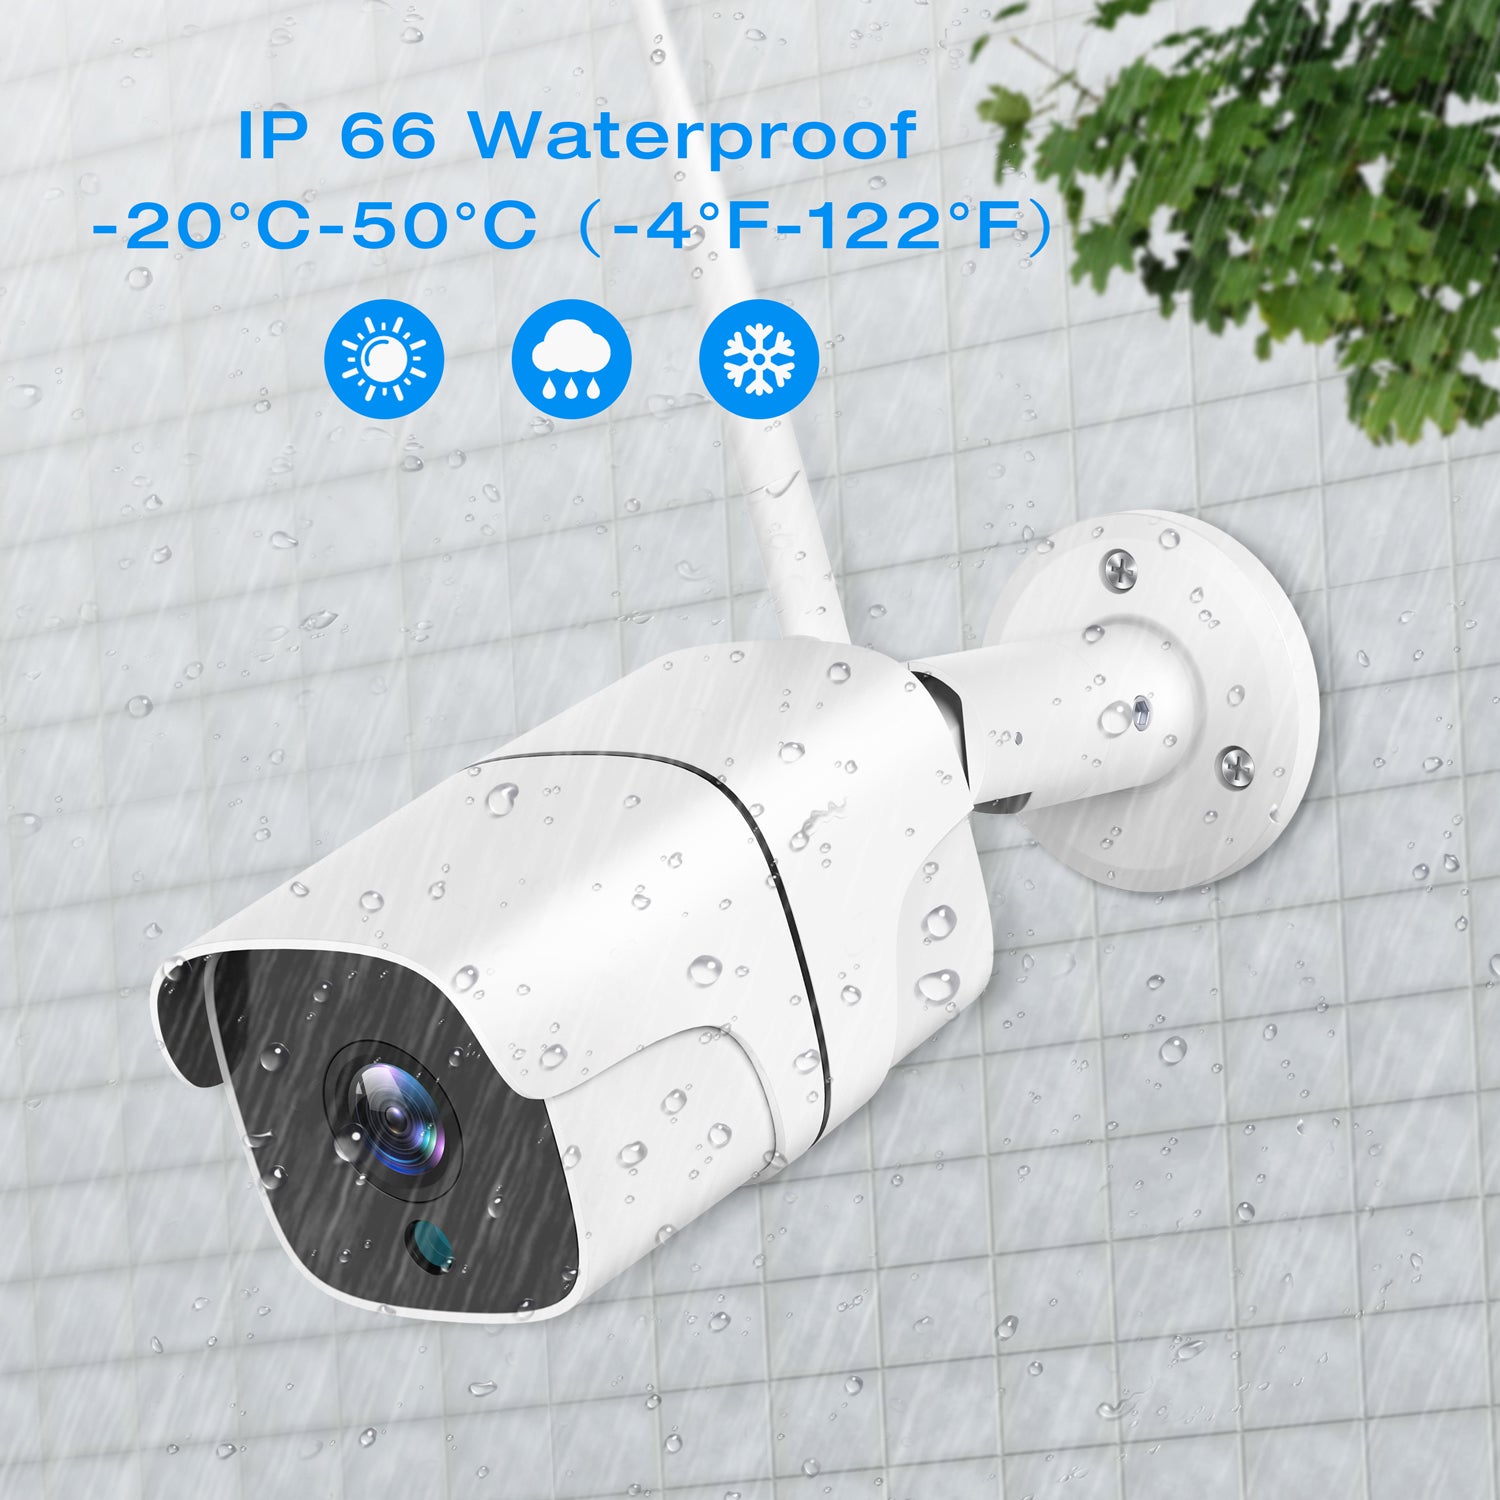 A Single Security Camera For Toguard W300/W400 Security System